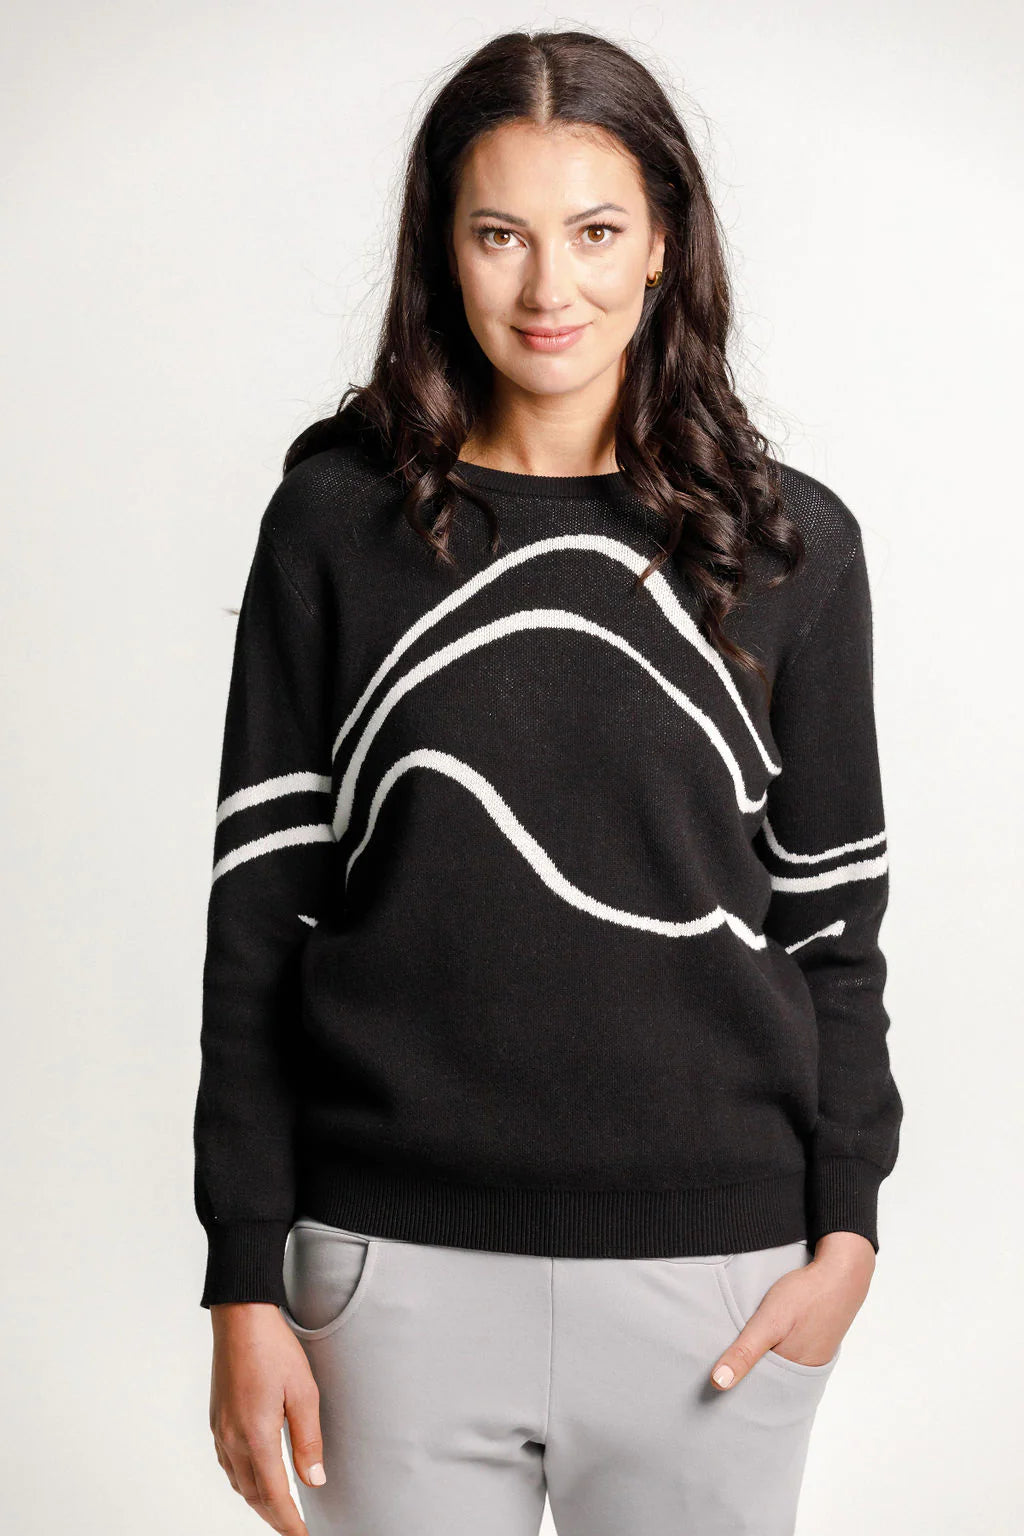 Homelee Ava Crew - Black with Mountain Print